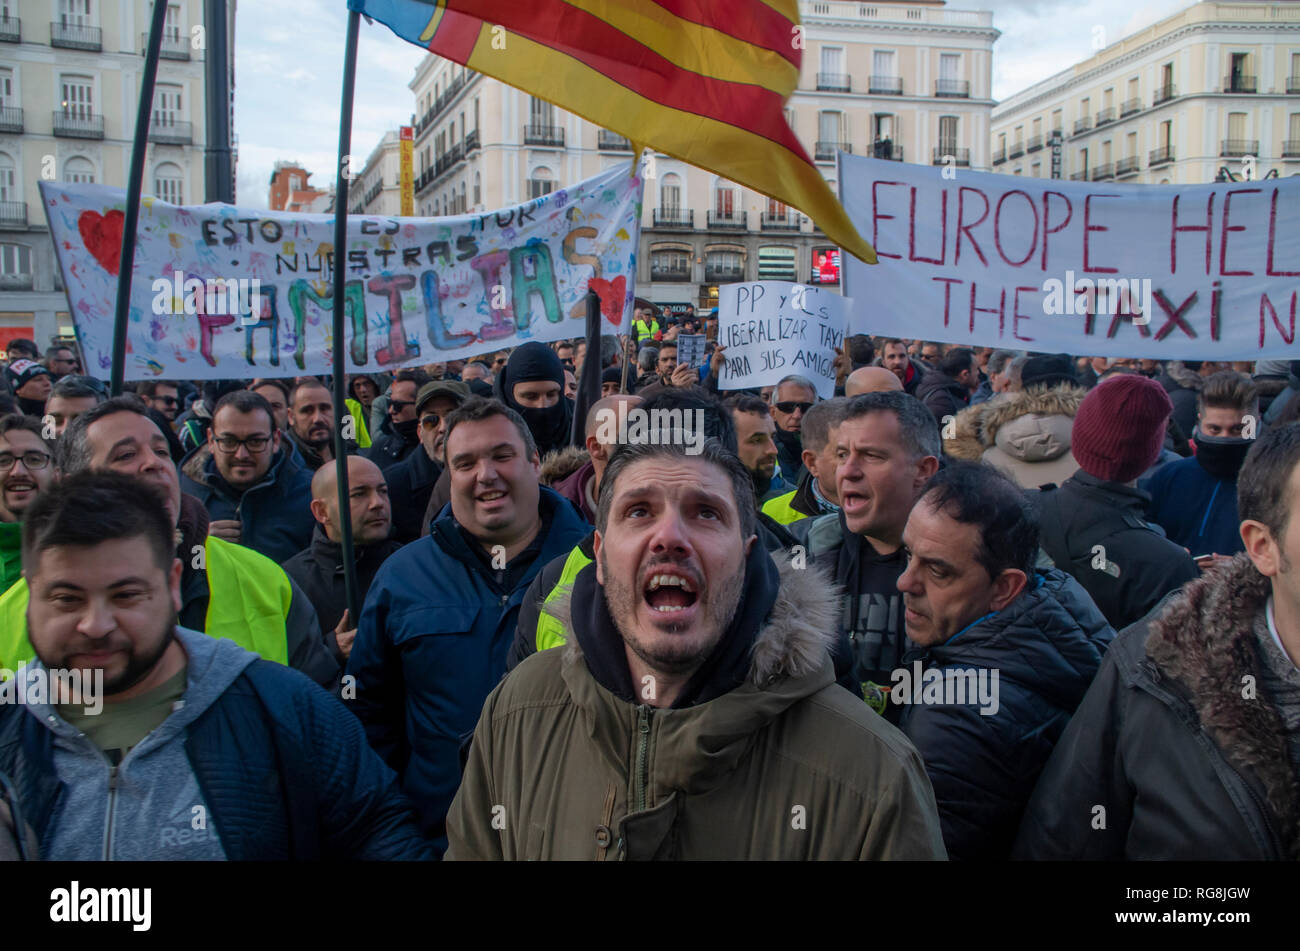 Madrid, Spain. 28th January 2019. Taxi drivers in Madrid have been on a strike for more than a week demanding the prohibition of Uber and Cabify in the Spanish capital-city.   Due to a lack of agreement, hundreds of taxi drivers protested at Puerta del Sol, Madrid’s central square.  In the picture a taxi driver in protesting angrily in the middle of the crowd. Credit: Lora Grigorova/Alamy Live News Stock Photo